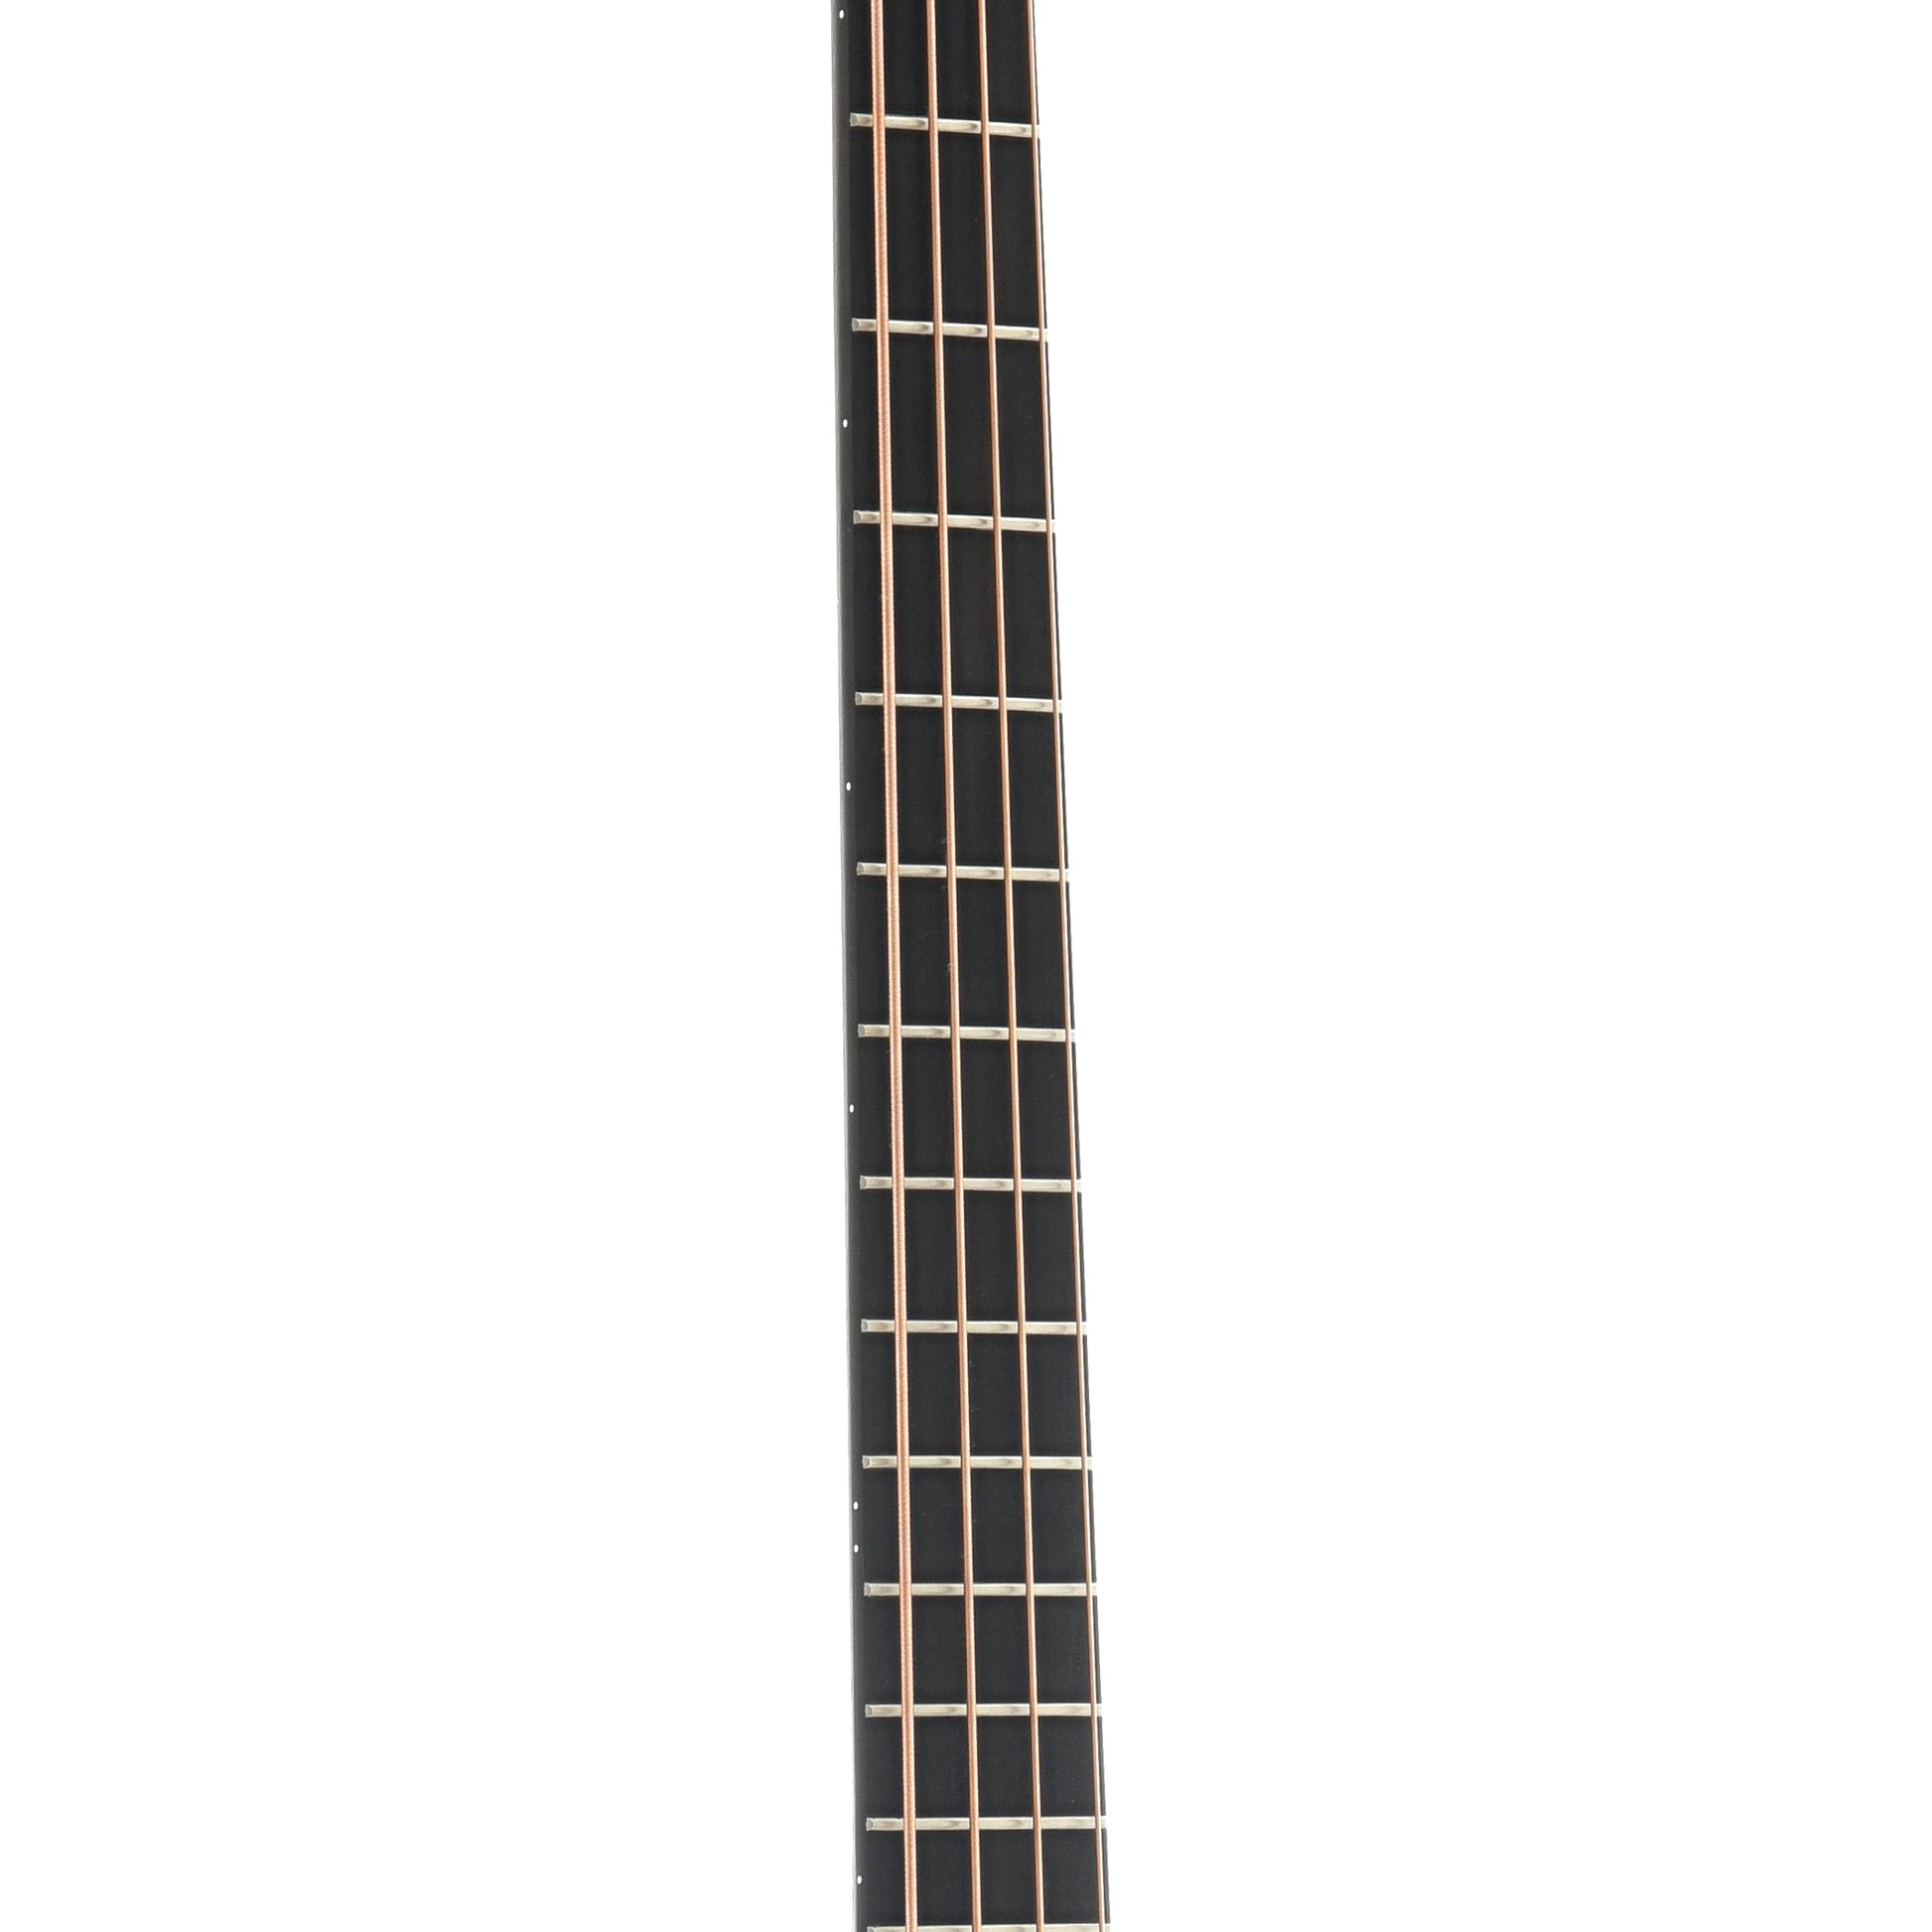 Fretboard of Martin BC-16E Acoustic-Electric Bass Guitar